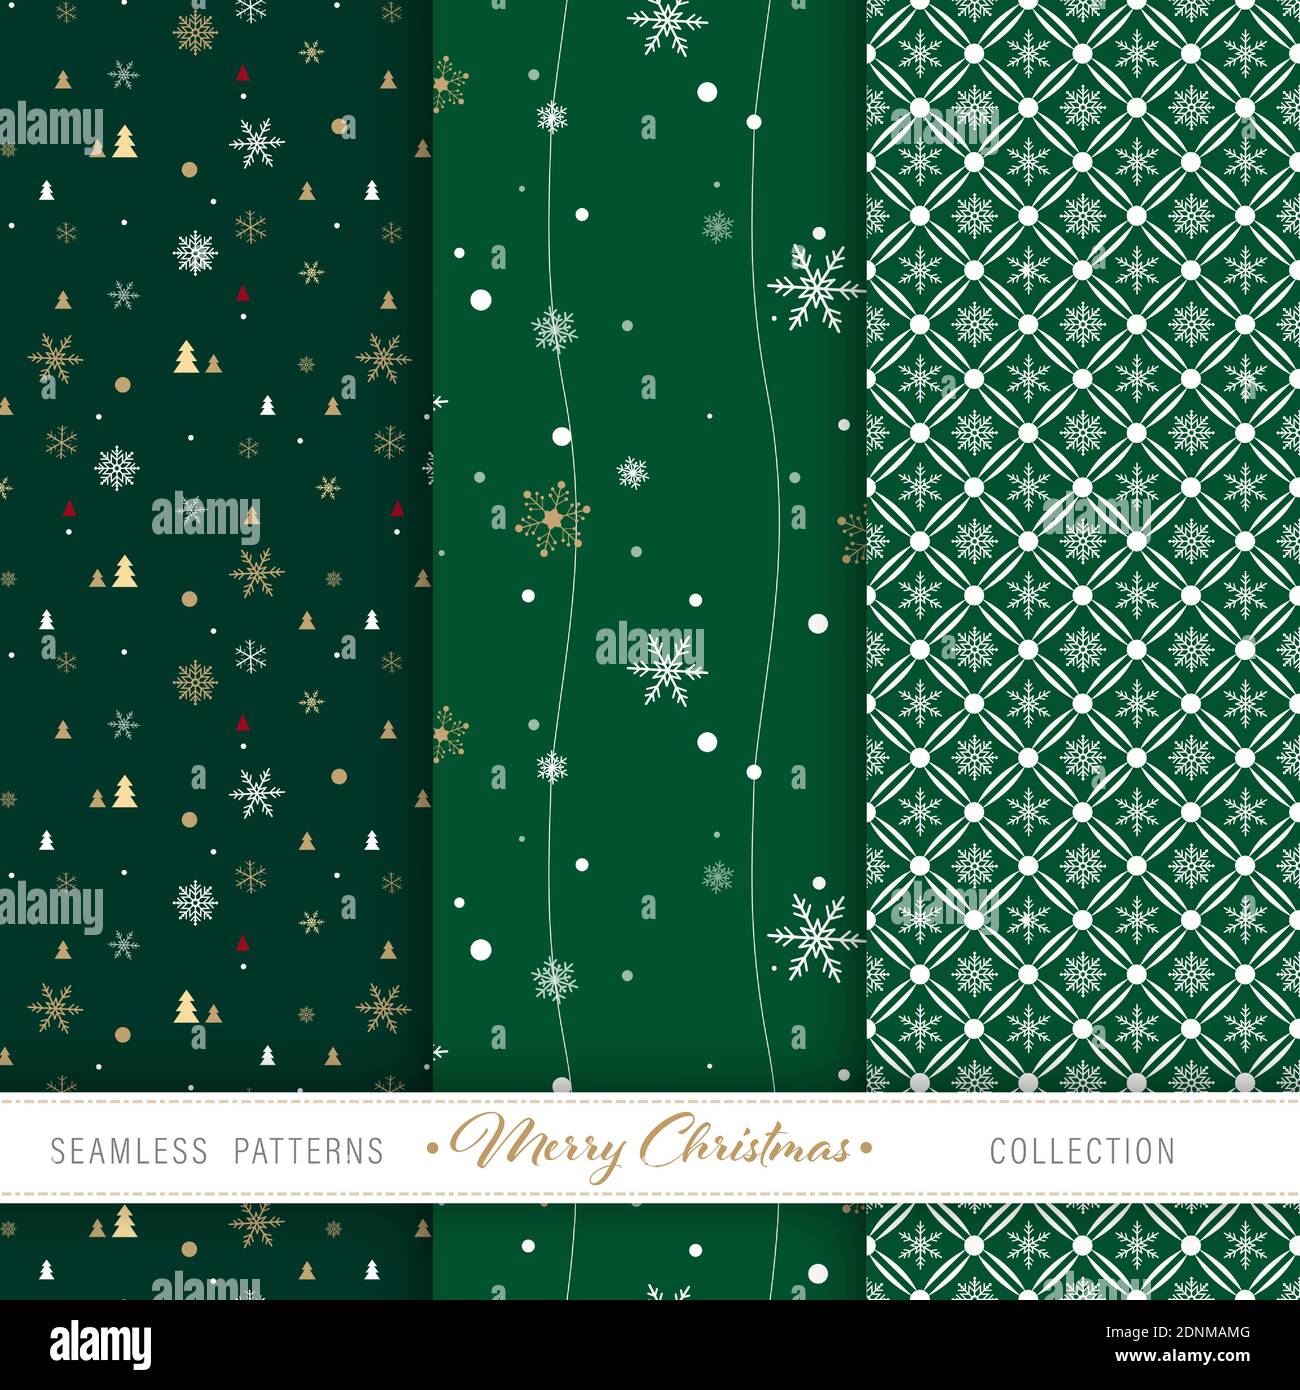 Christmas seamless patterns set of 3 designs for backdrops, gift wrapping papers, crafting etc. Stock Vector